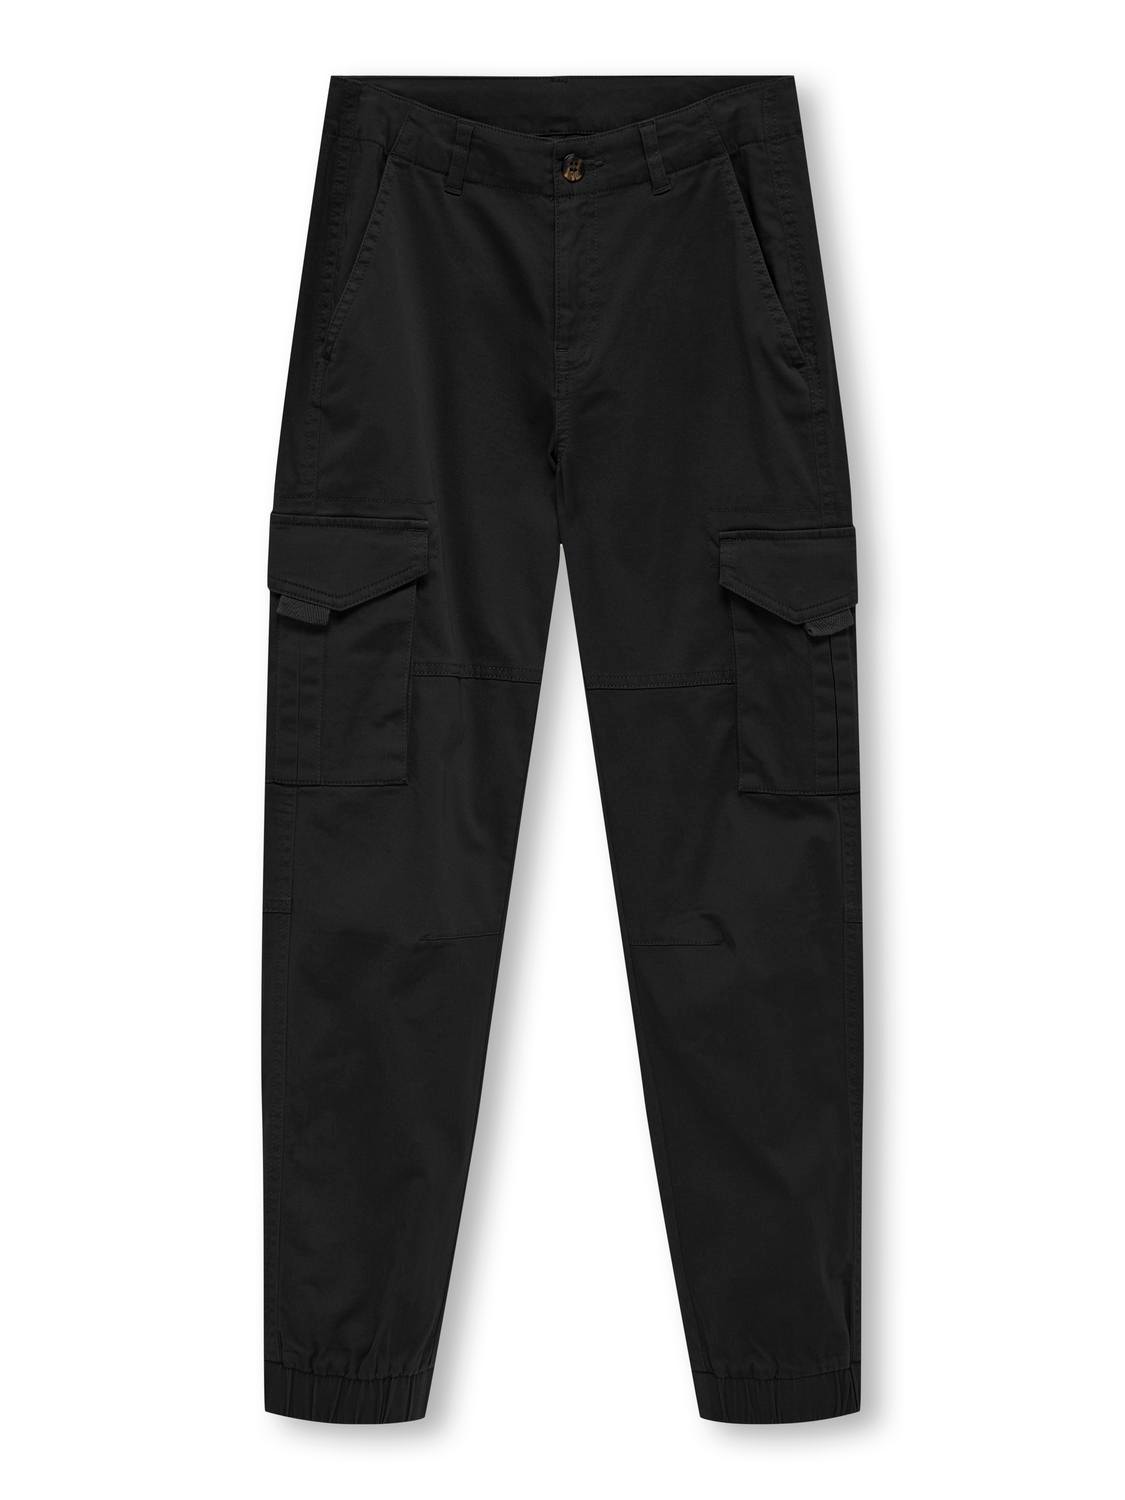 ONLY Cargo pants -Black - 15300224